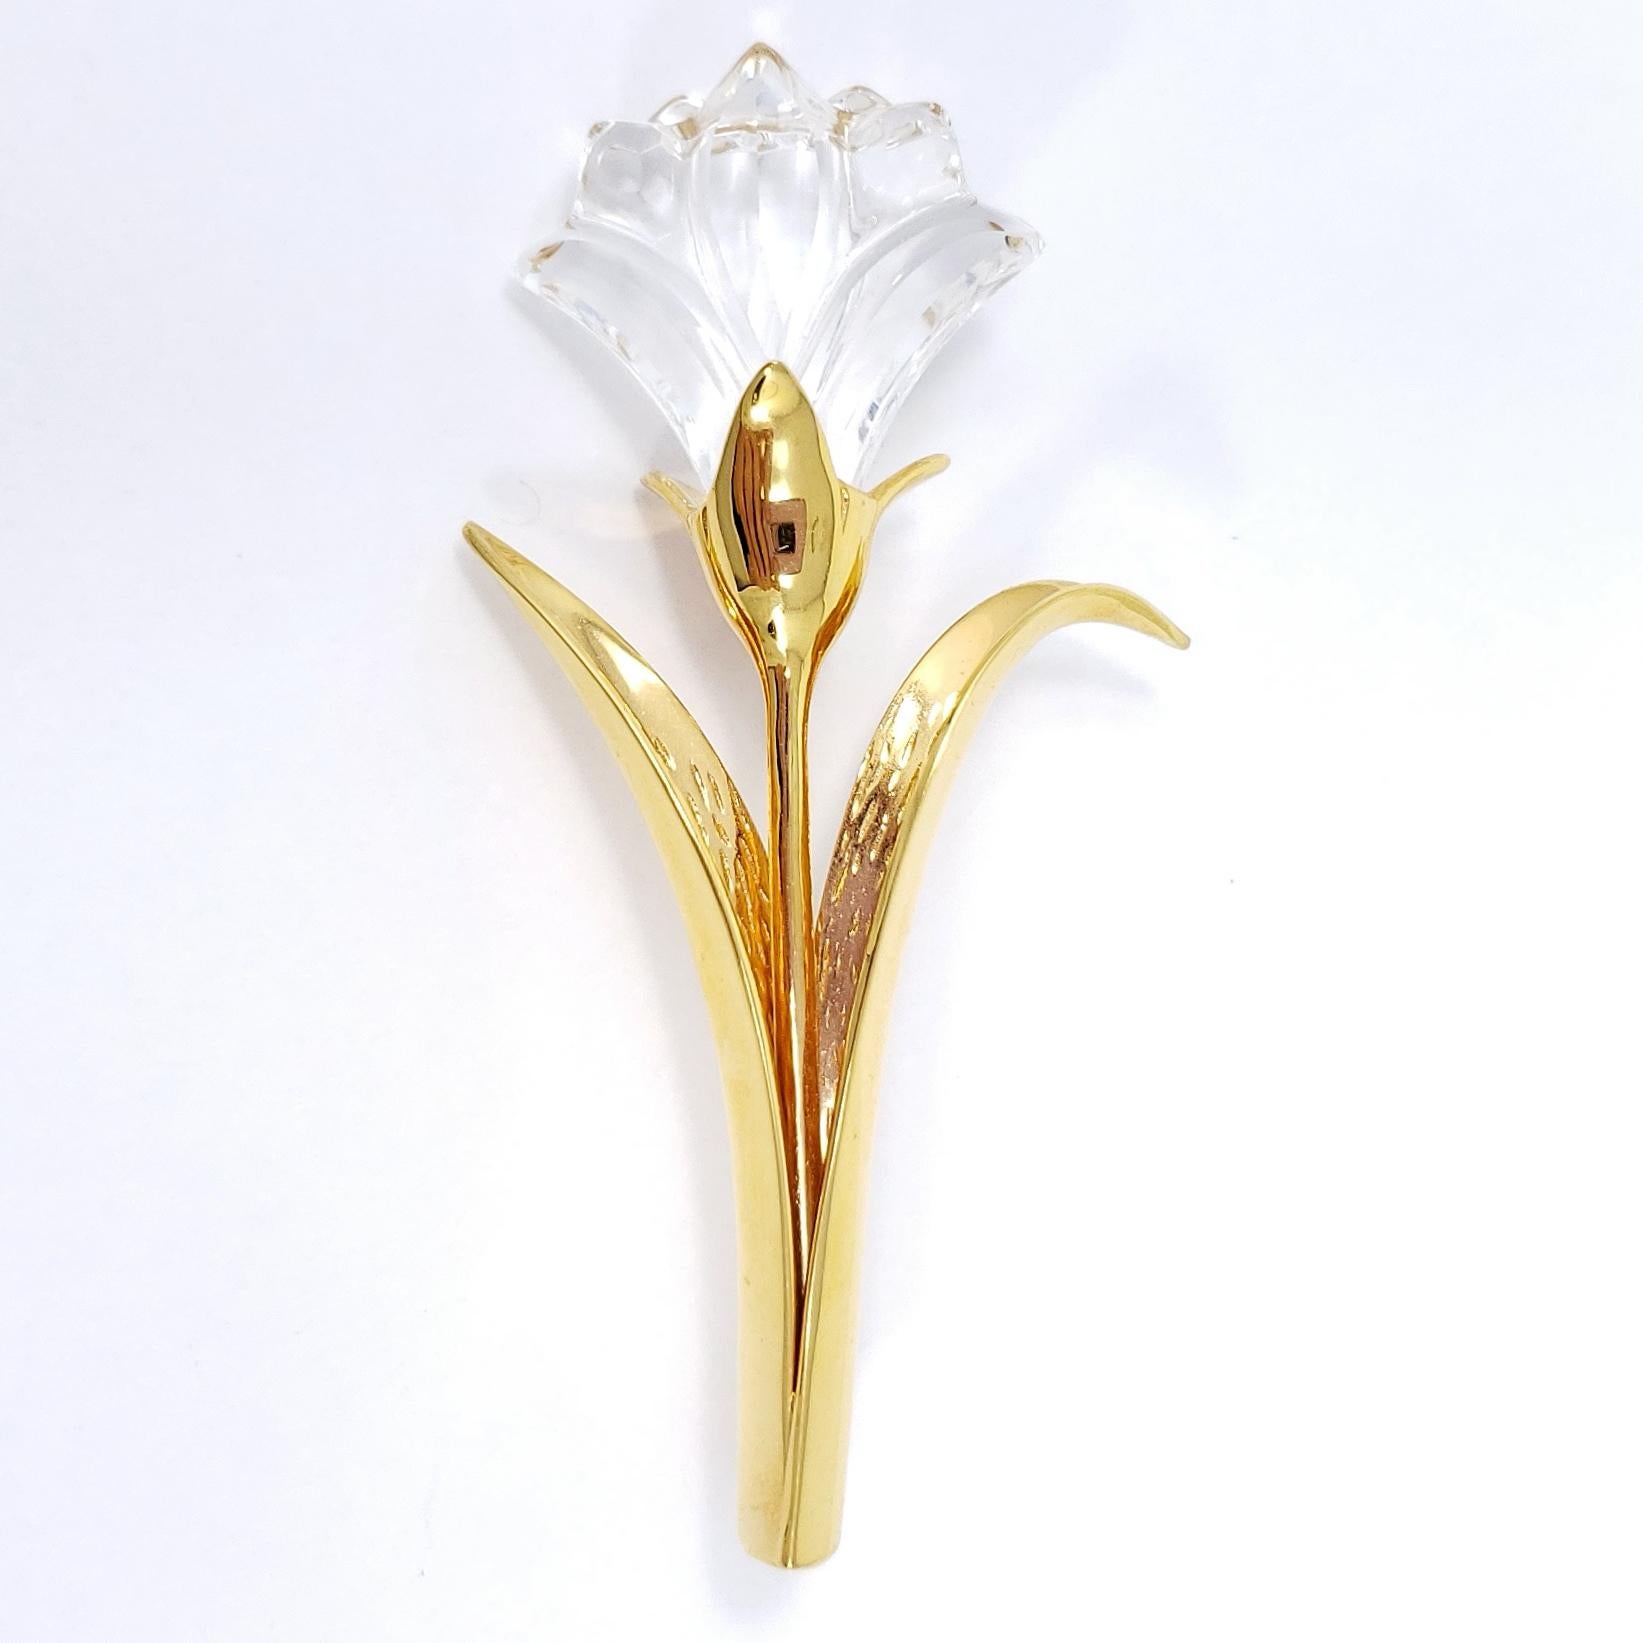 A stylish lily pin brooch by Swarovski, featuring a gold-plated stem and crystal flower petals.

Hallmarks: Swarovski Swan